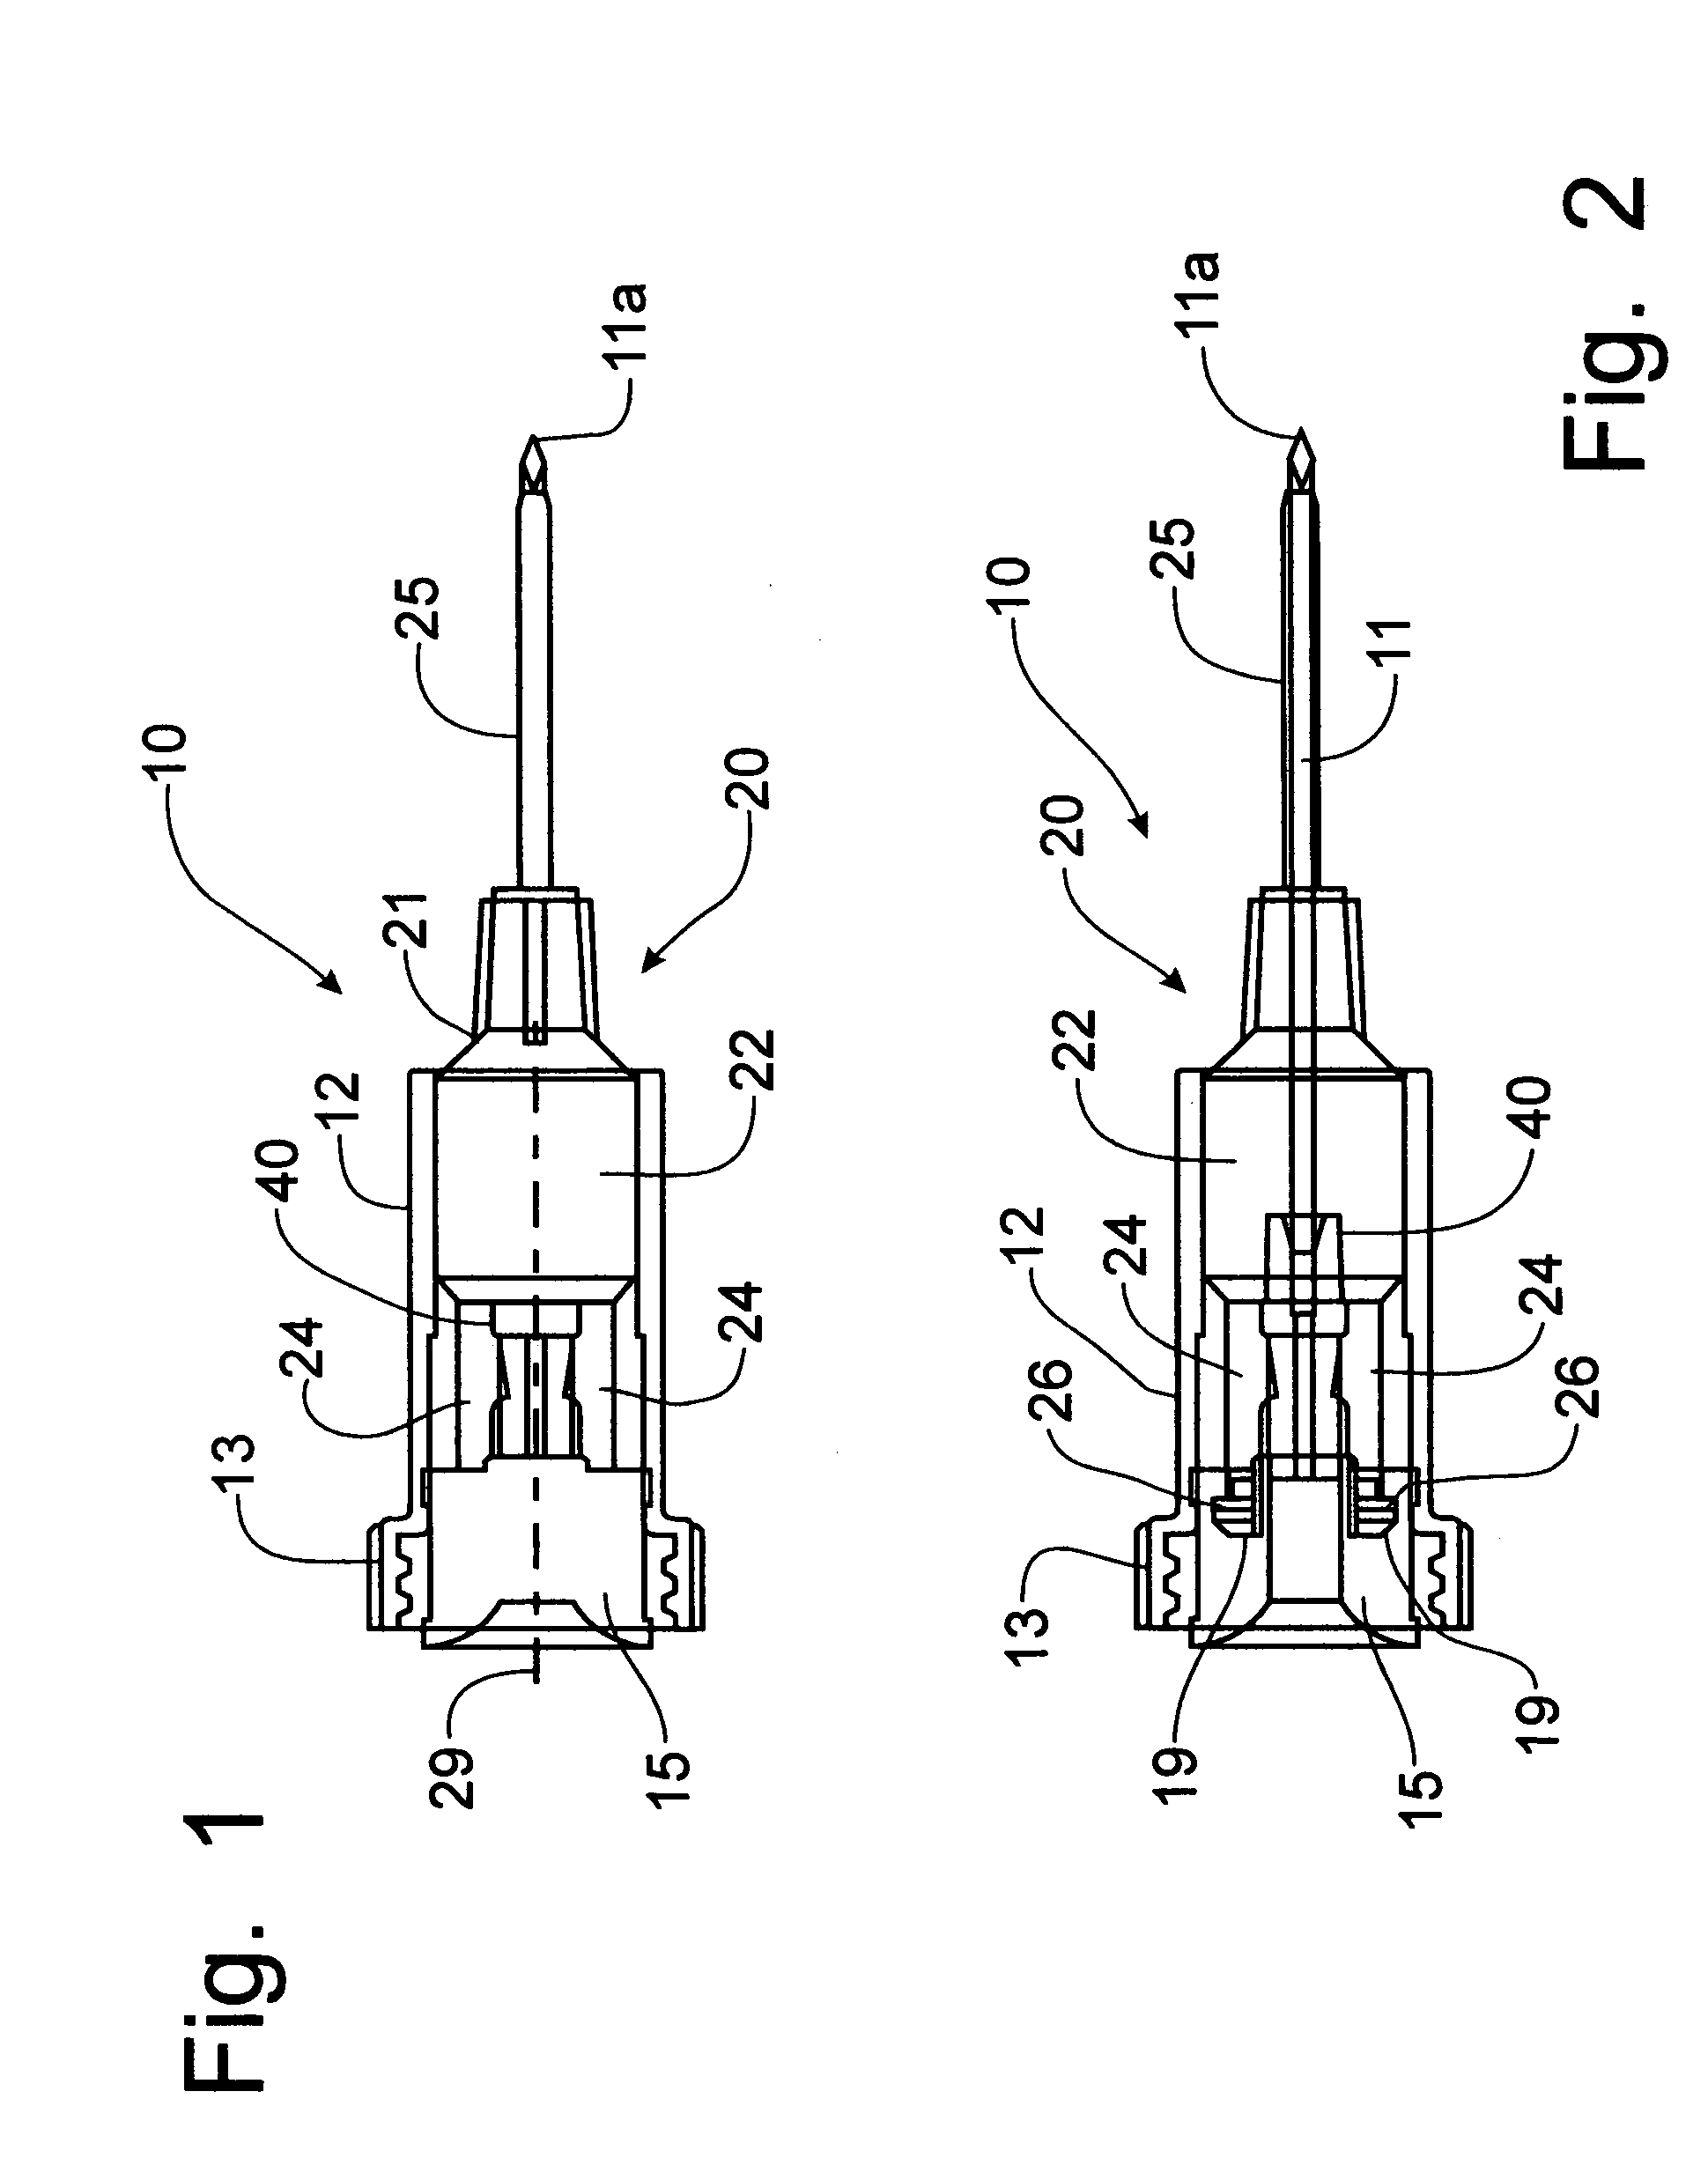 Lock apparatus for a safety needle assembly